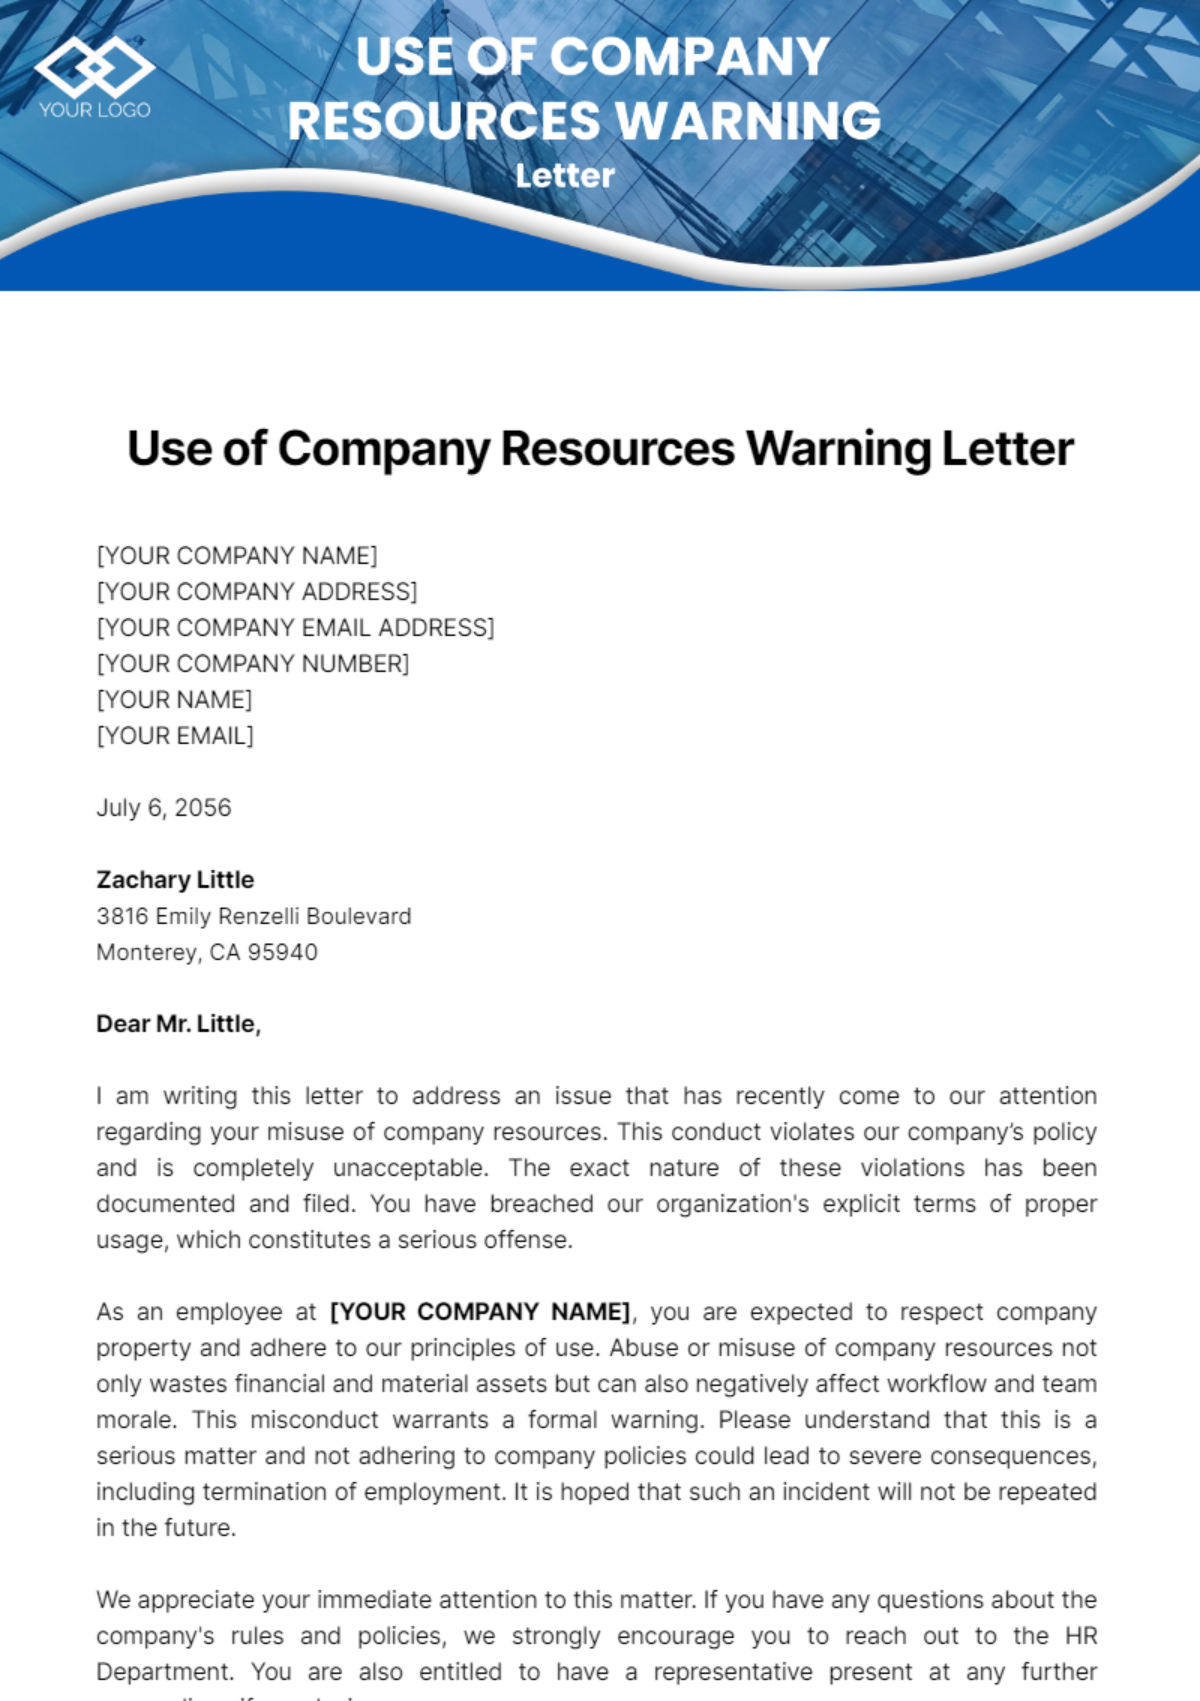 Use of Company Resources Warning Letter Template